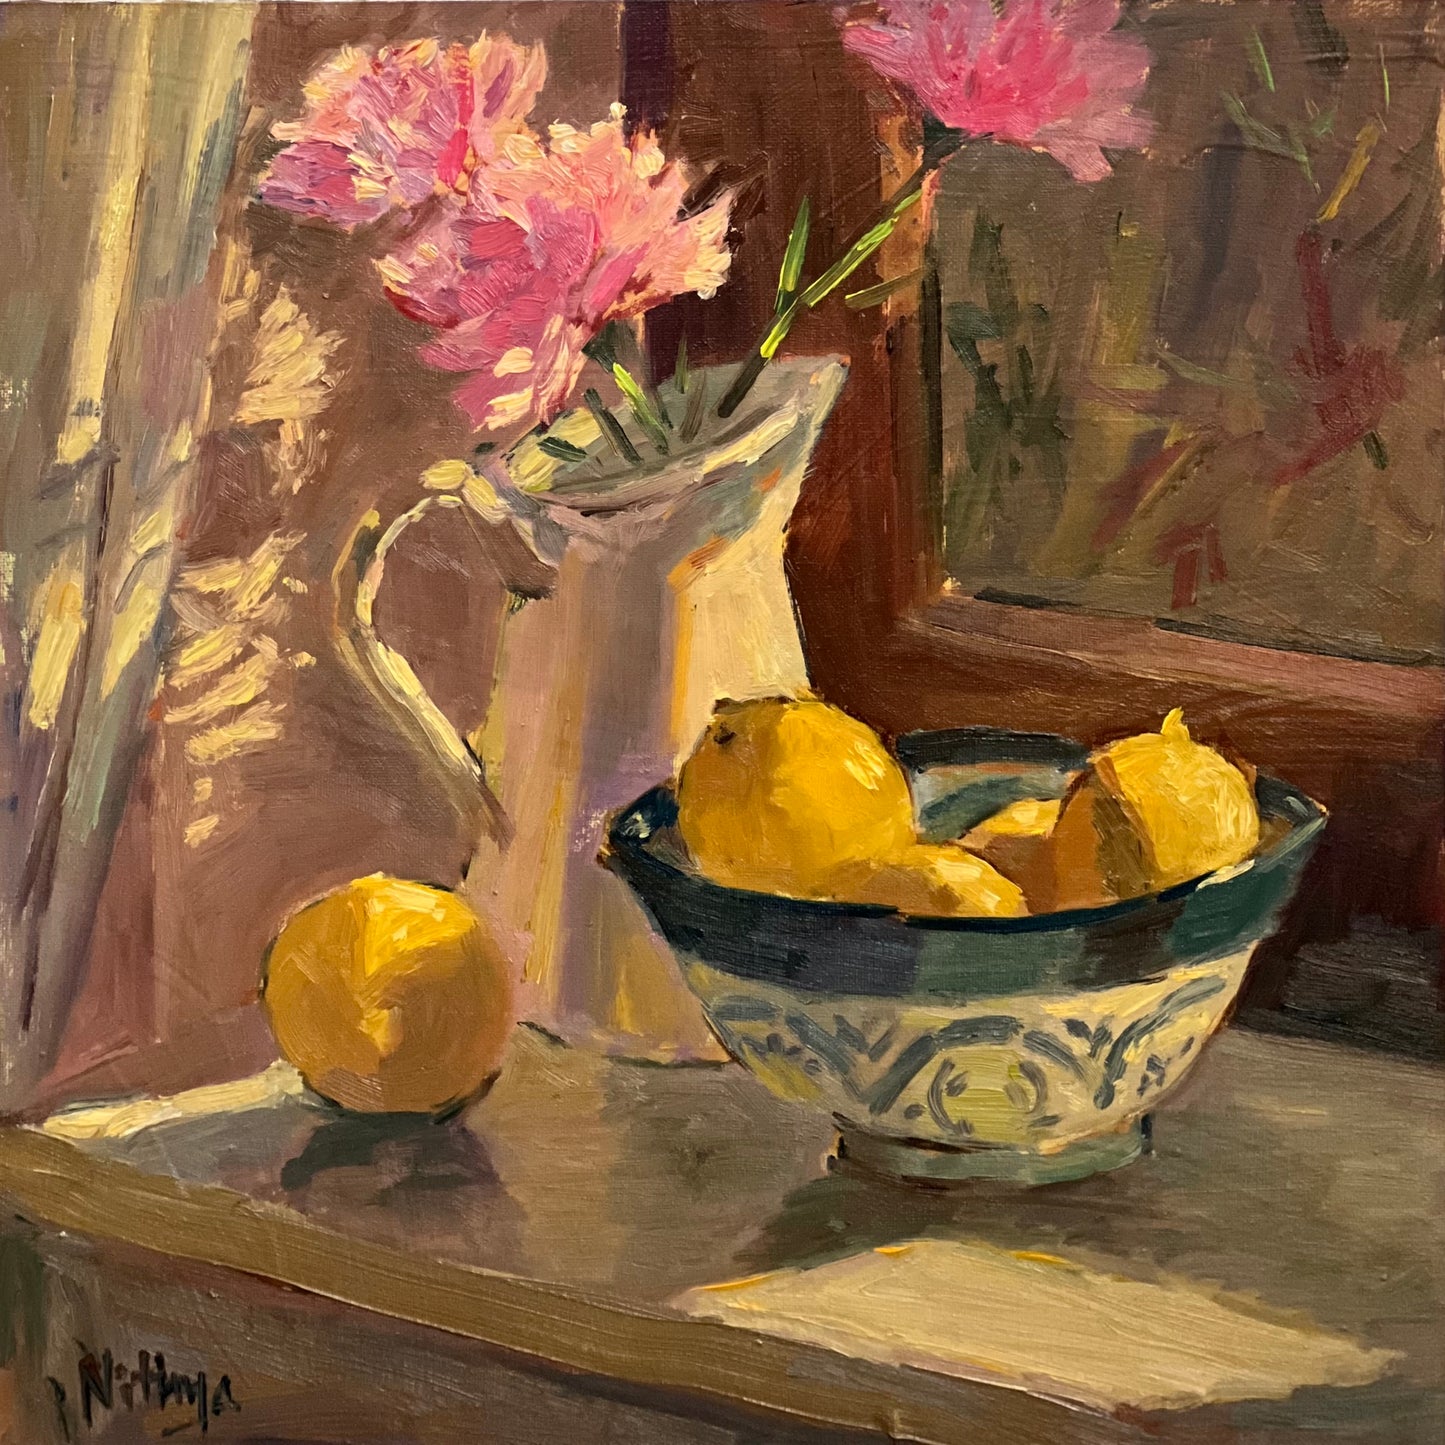 Sunkissed lemons and pink by the window - still life oil painting